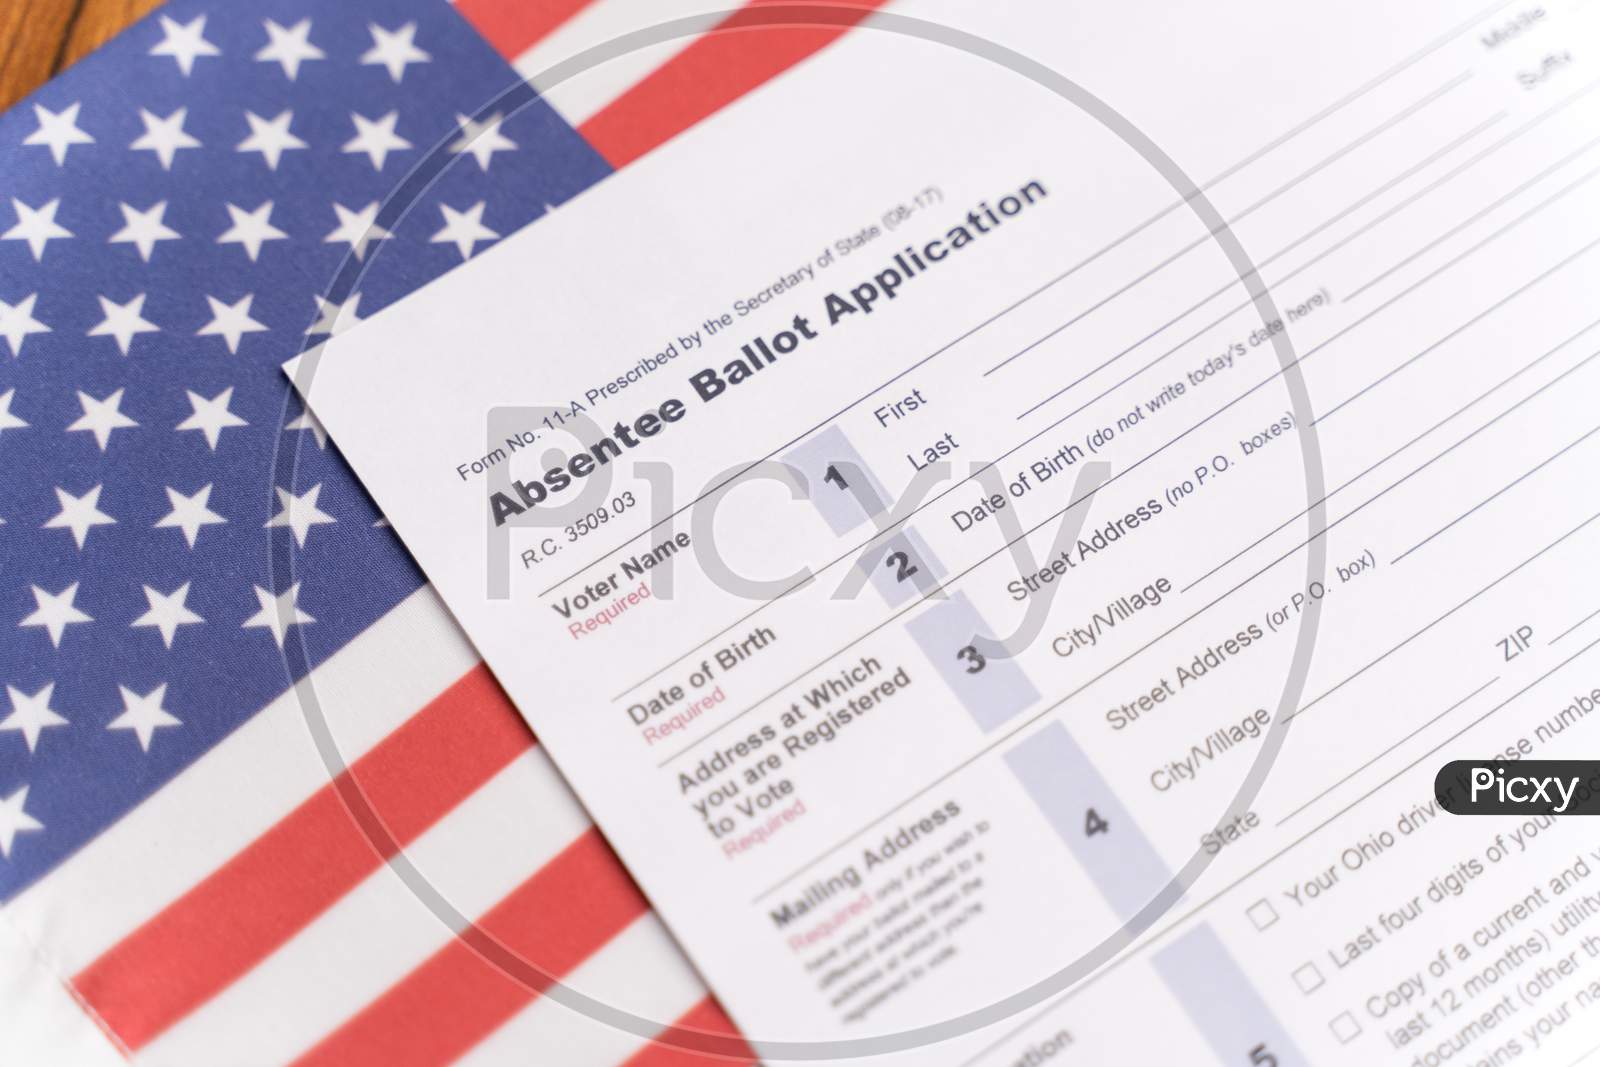 Maski, India - 23, June 2020 : Absentee Ballot Application On Us Flag For American Presidential Elections